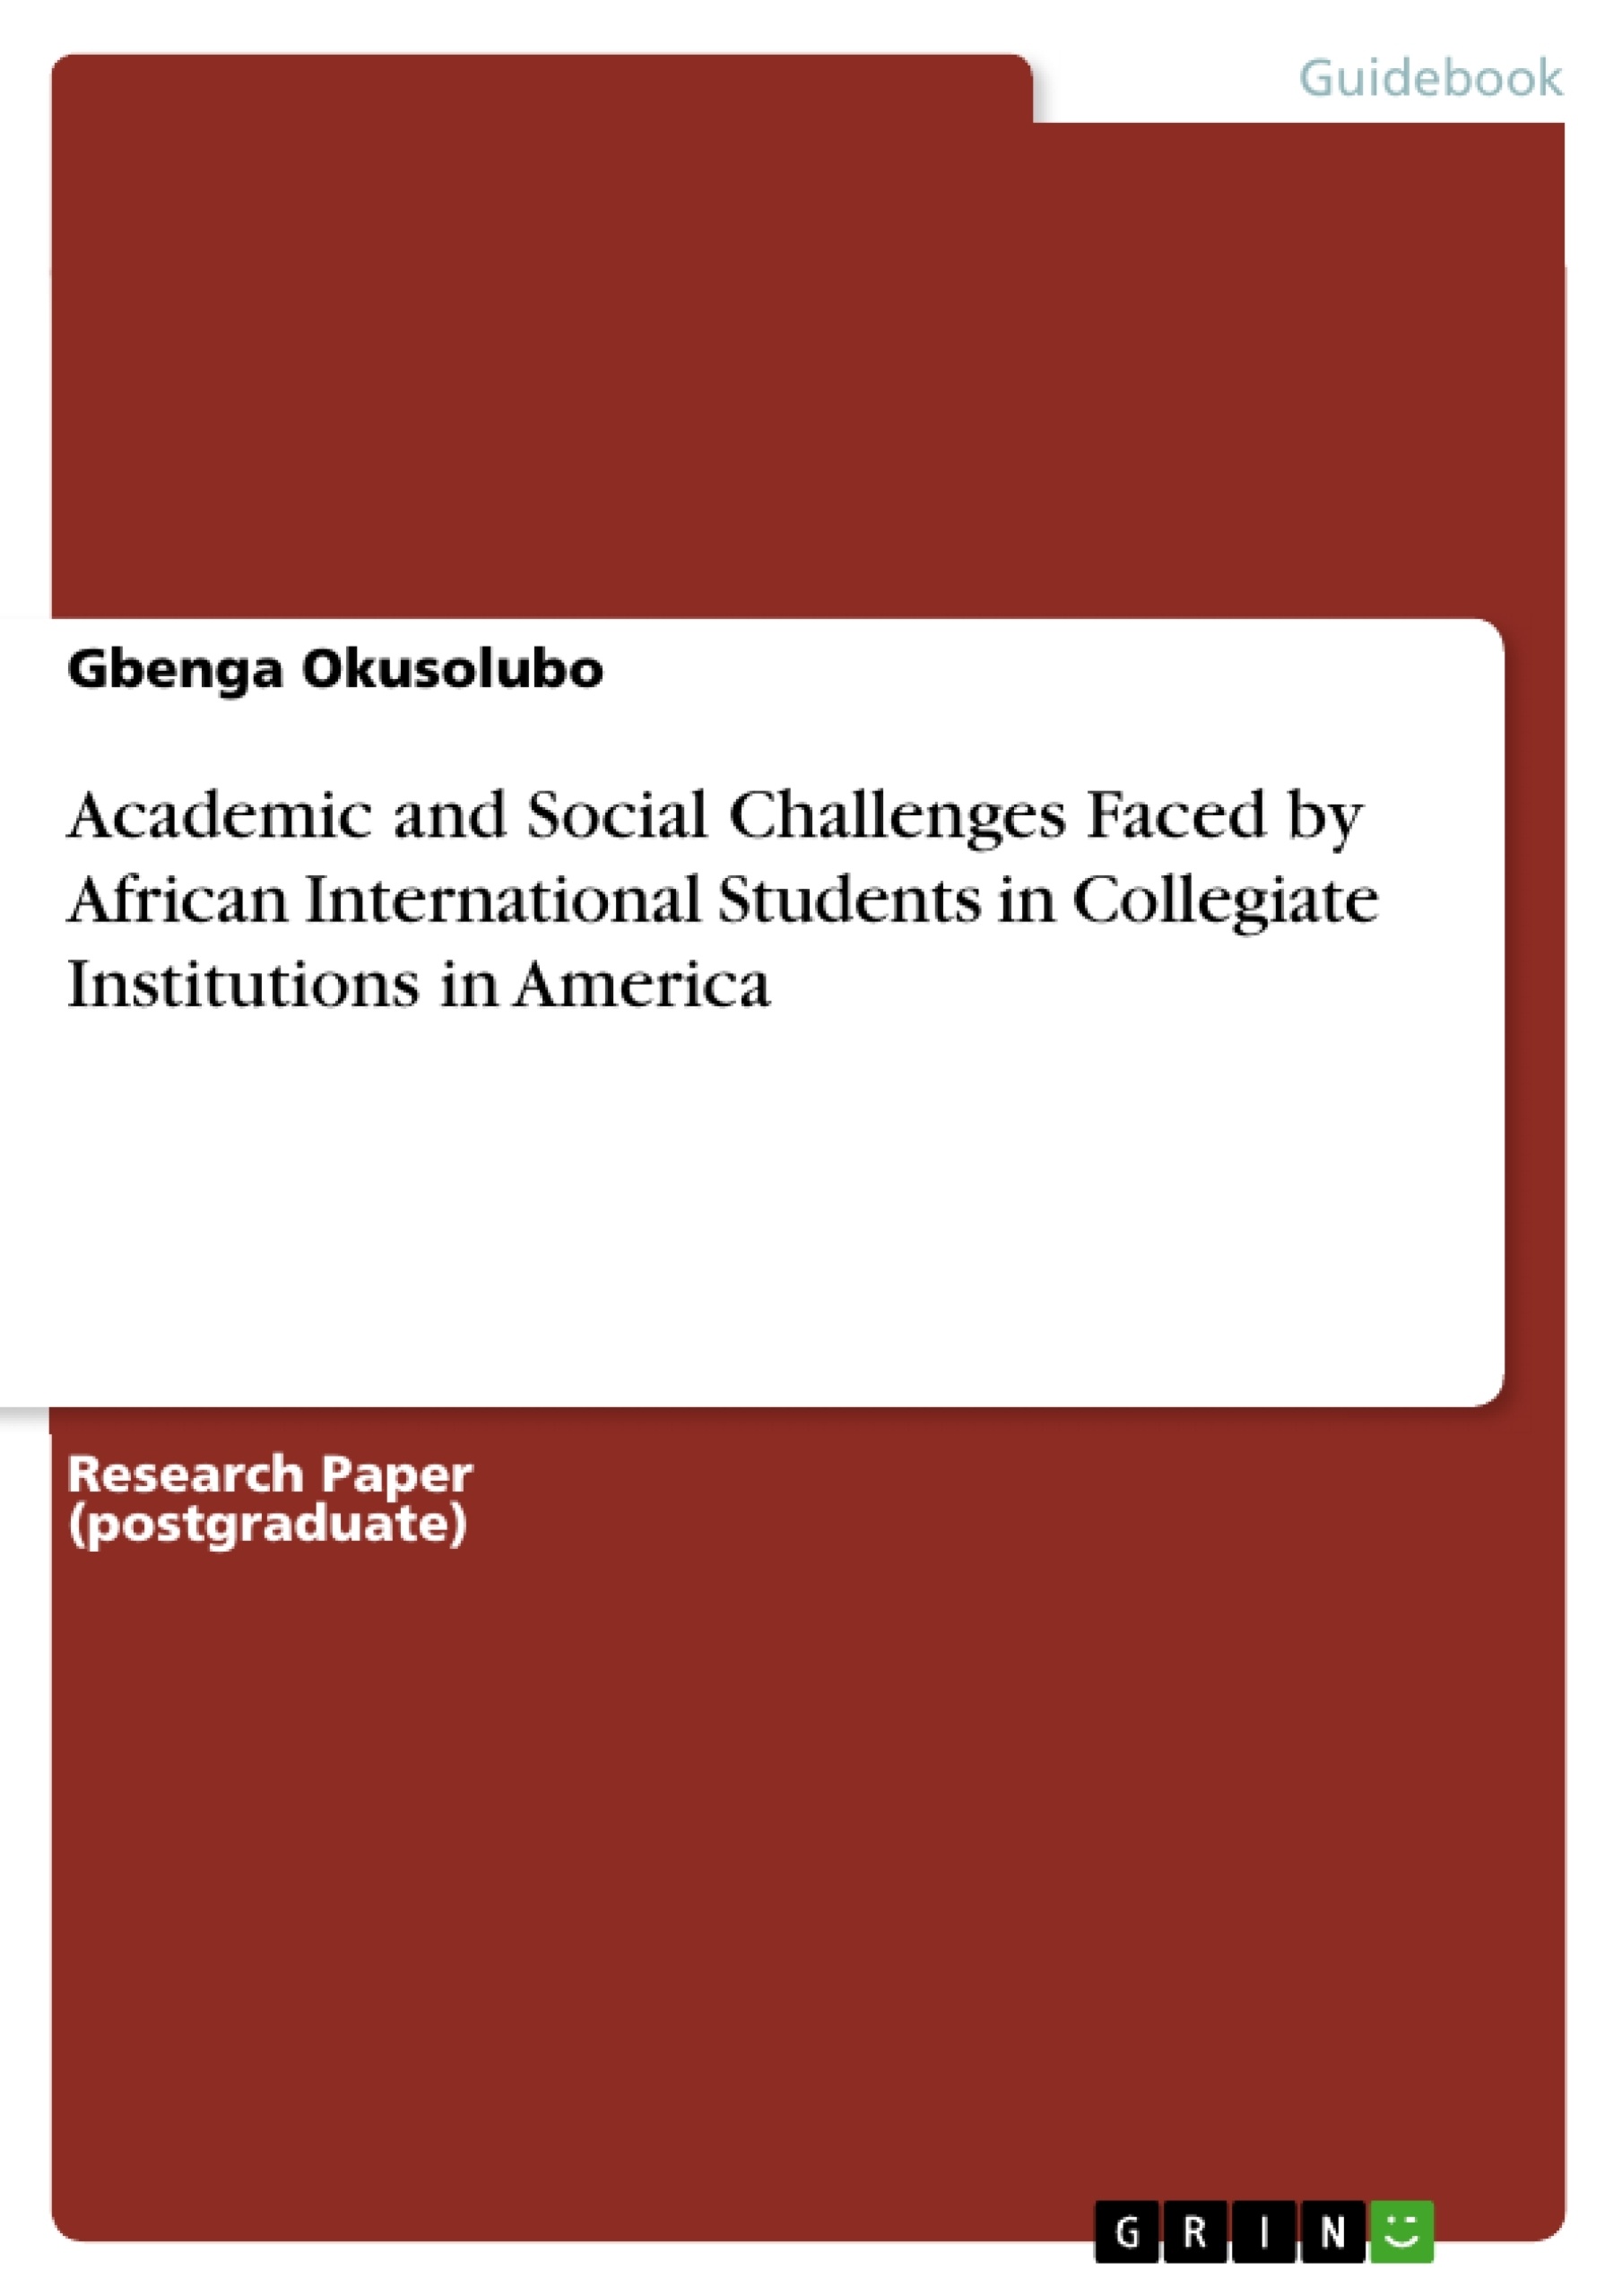 Titre: Academic and Social Challenges Faced by African International Students in Collegiate Institutions in America